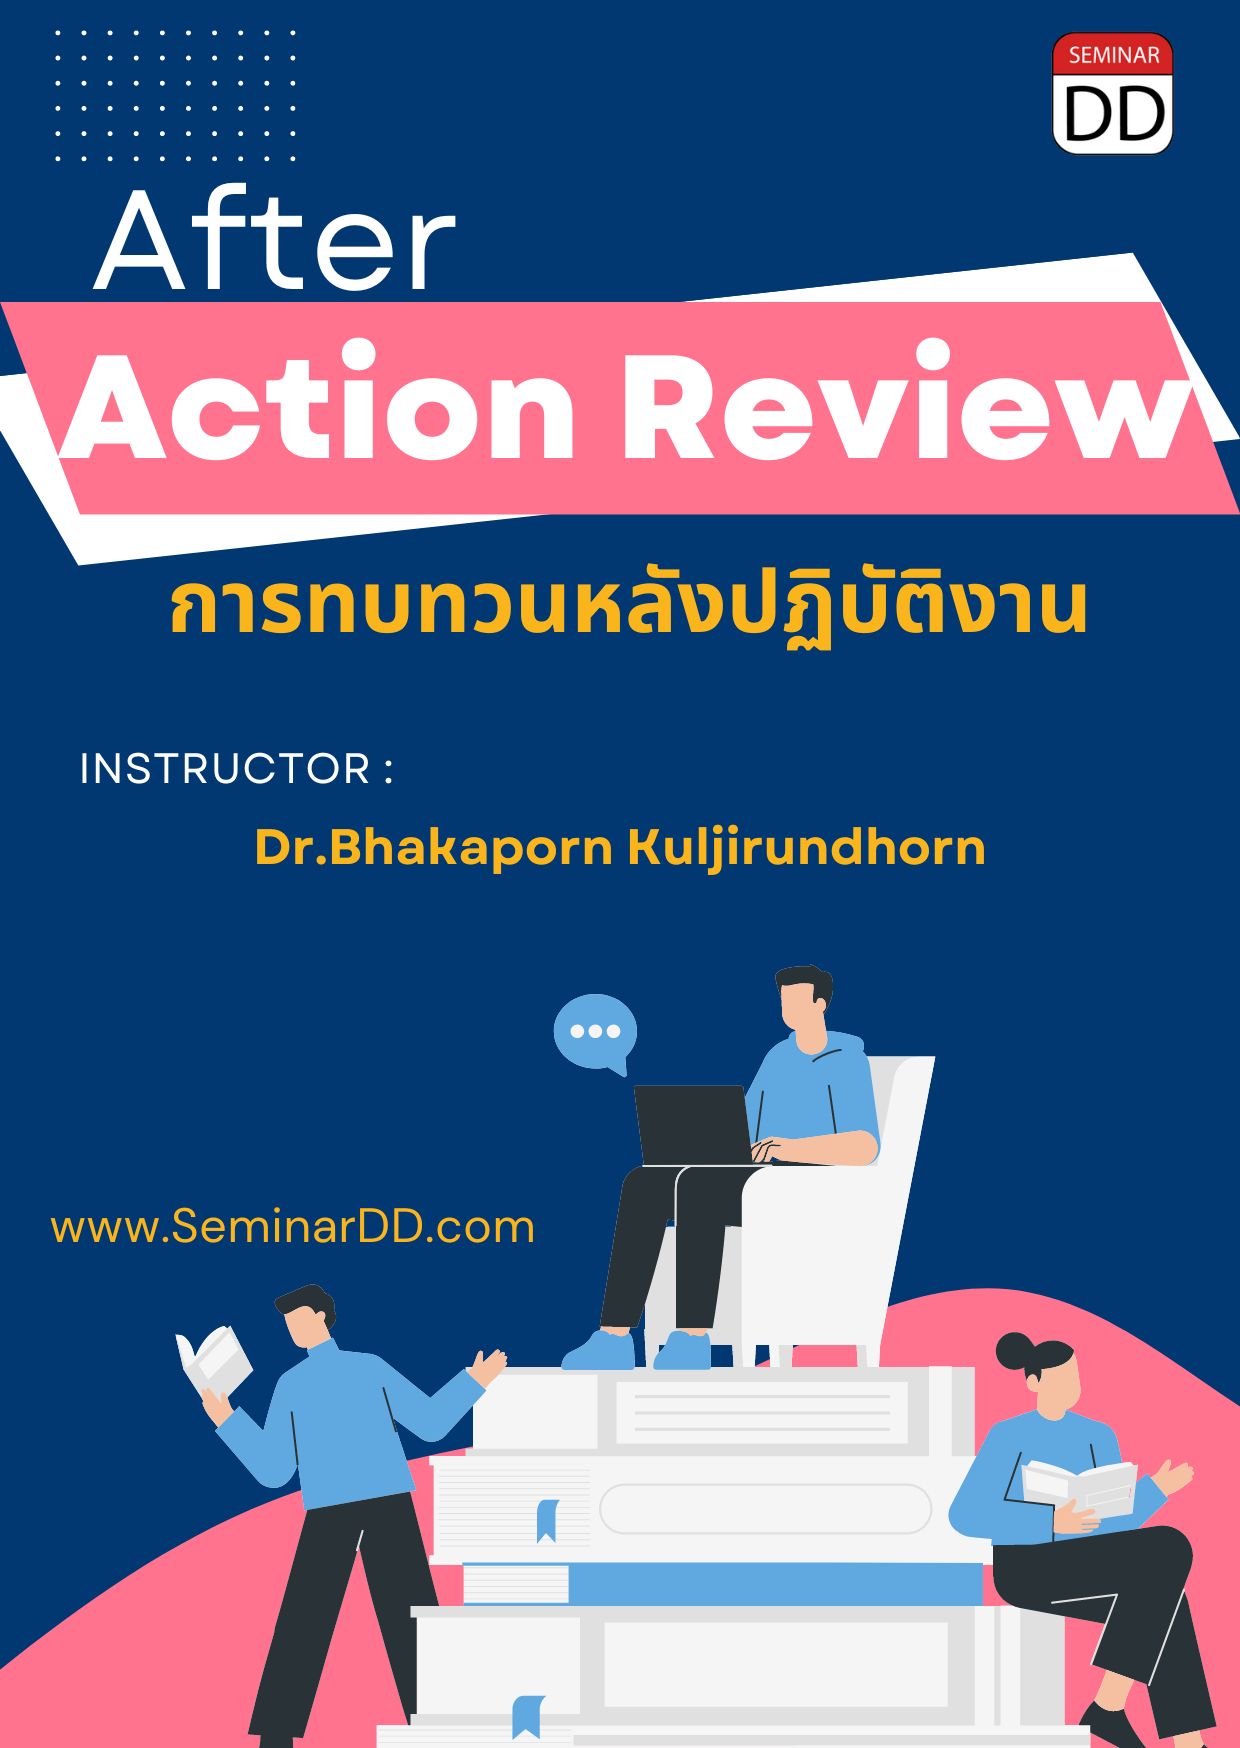 AFTER ACTION REVIEW ( AAR ) การทบทวนหลังปฏิบัติงาน